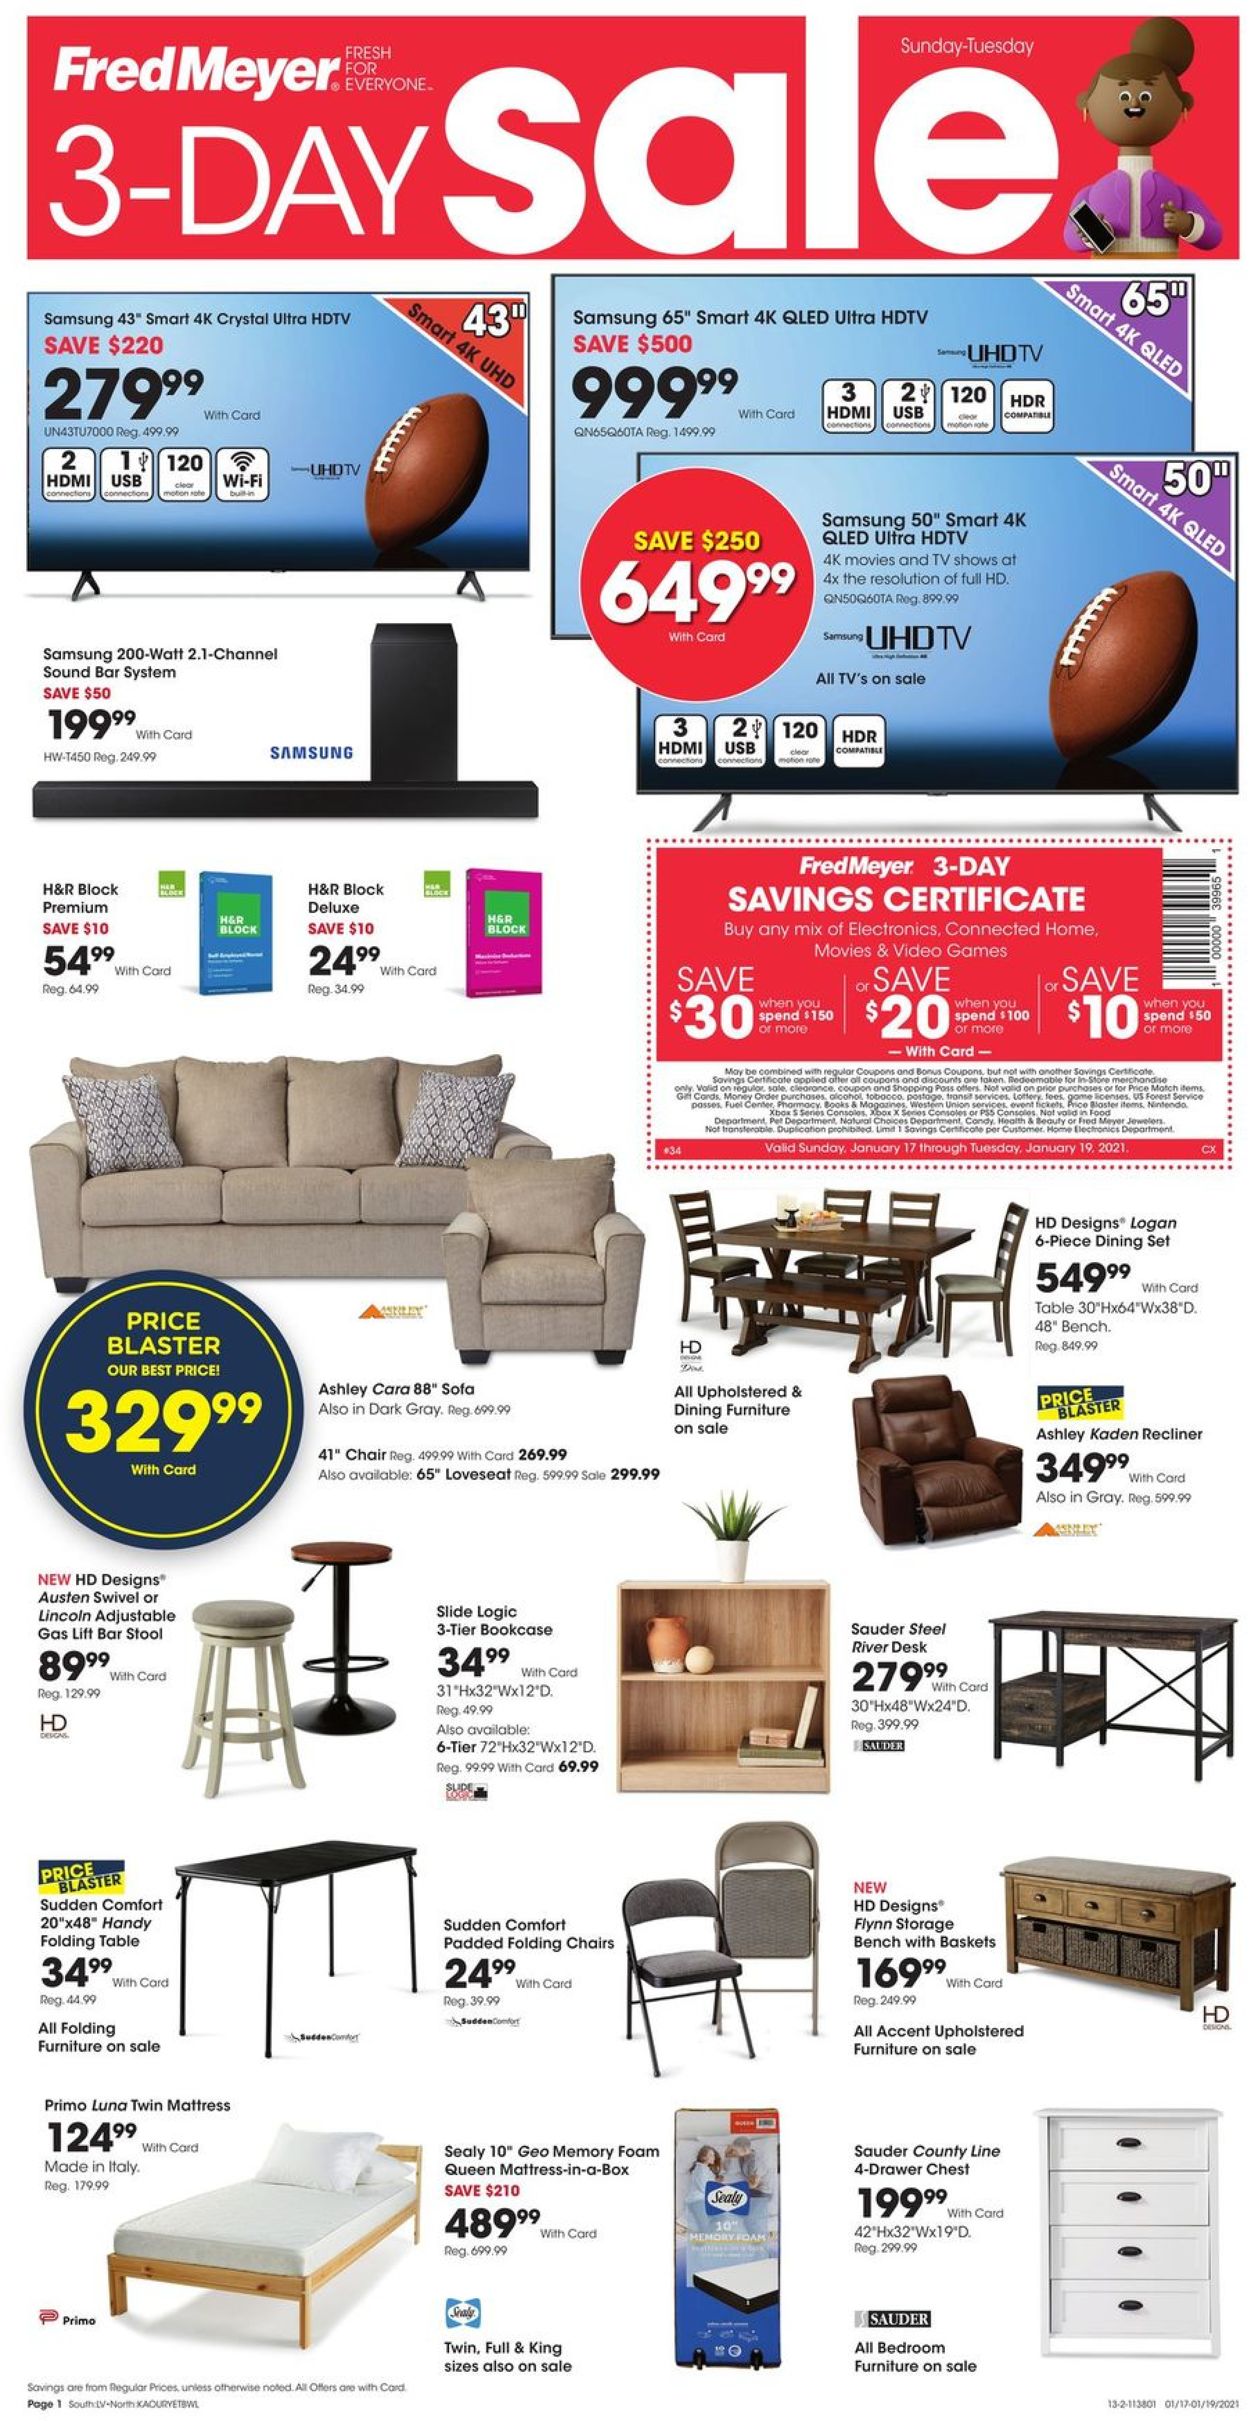 Fred Meyer 3-Day Sale 2021 Weekly Ad Circular - valid 01/17-01/19/2021